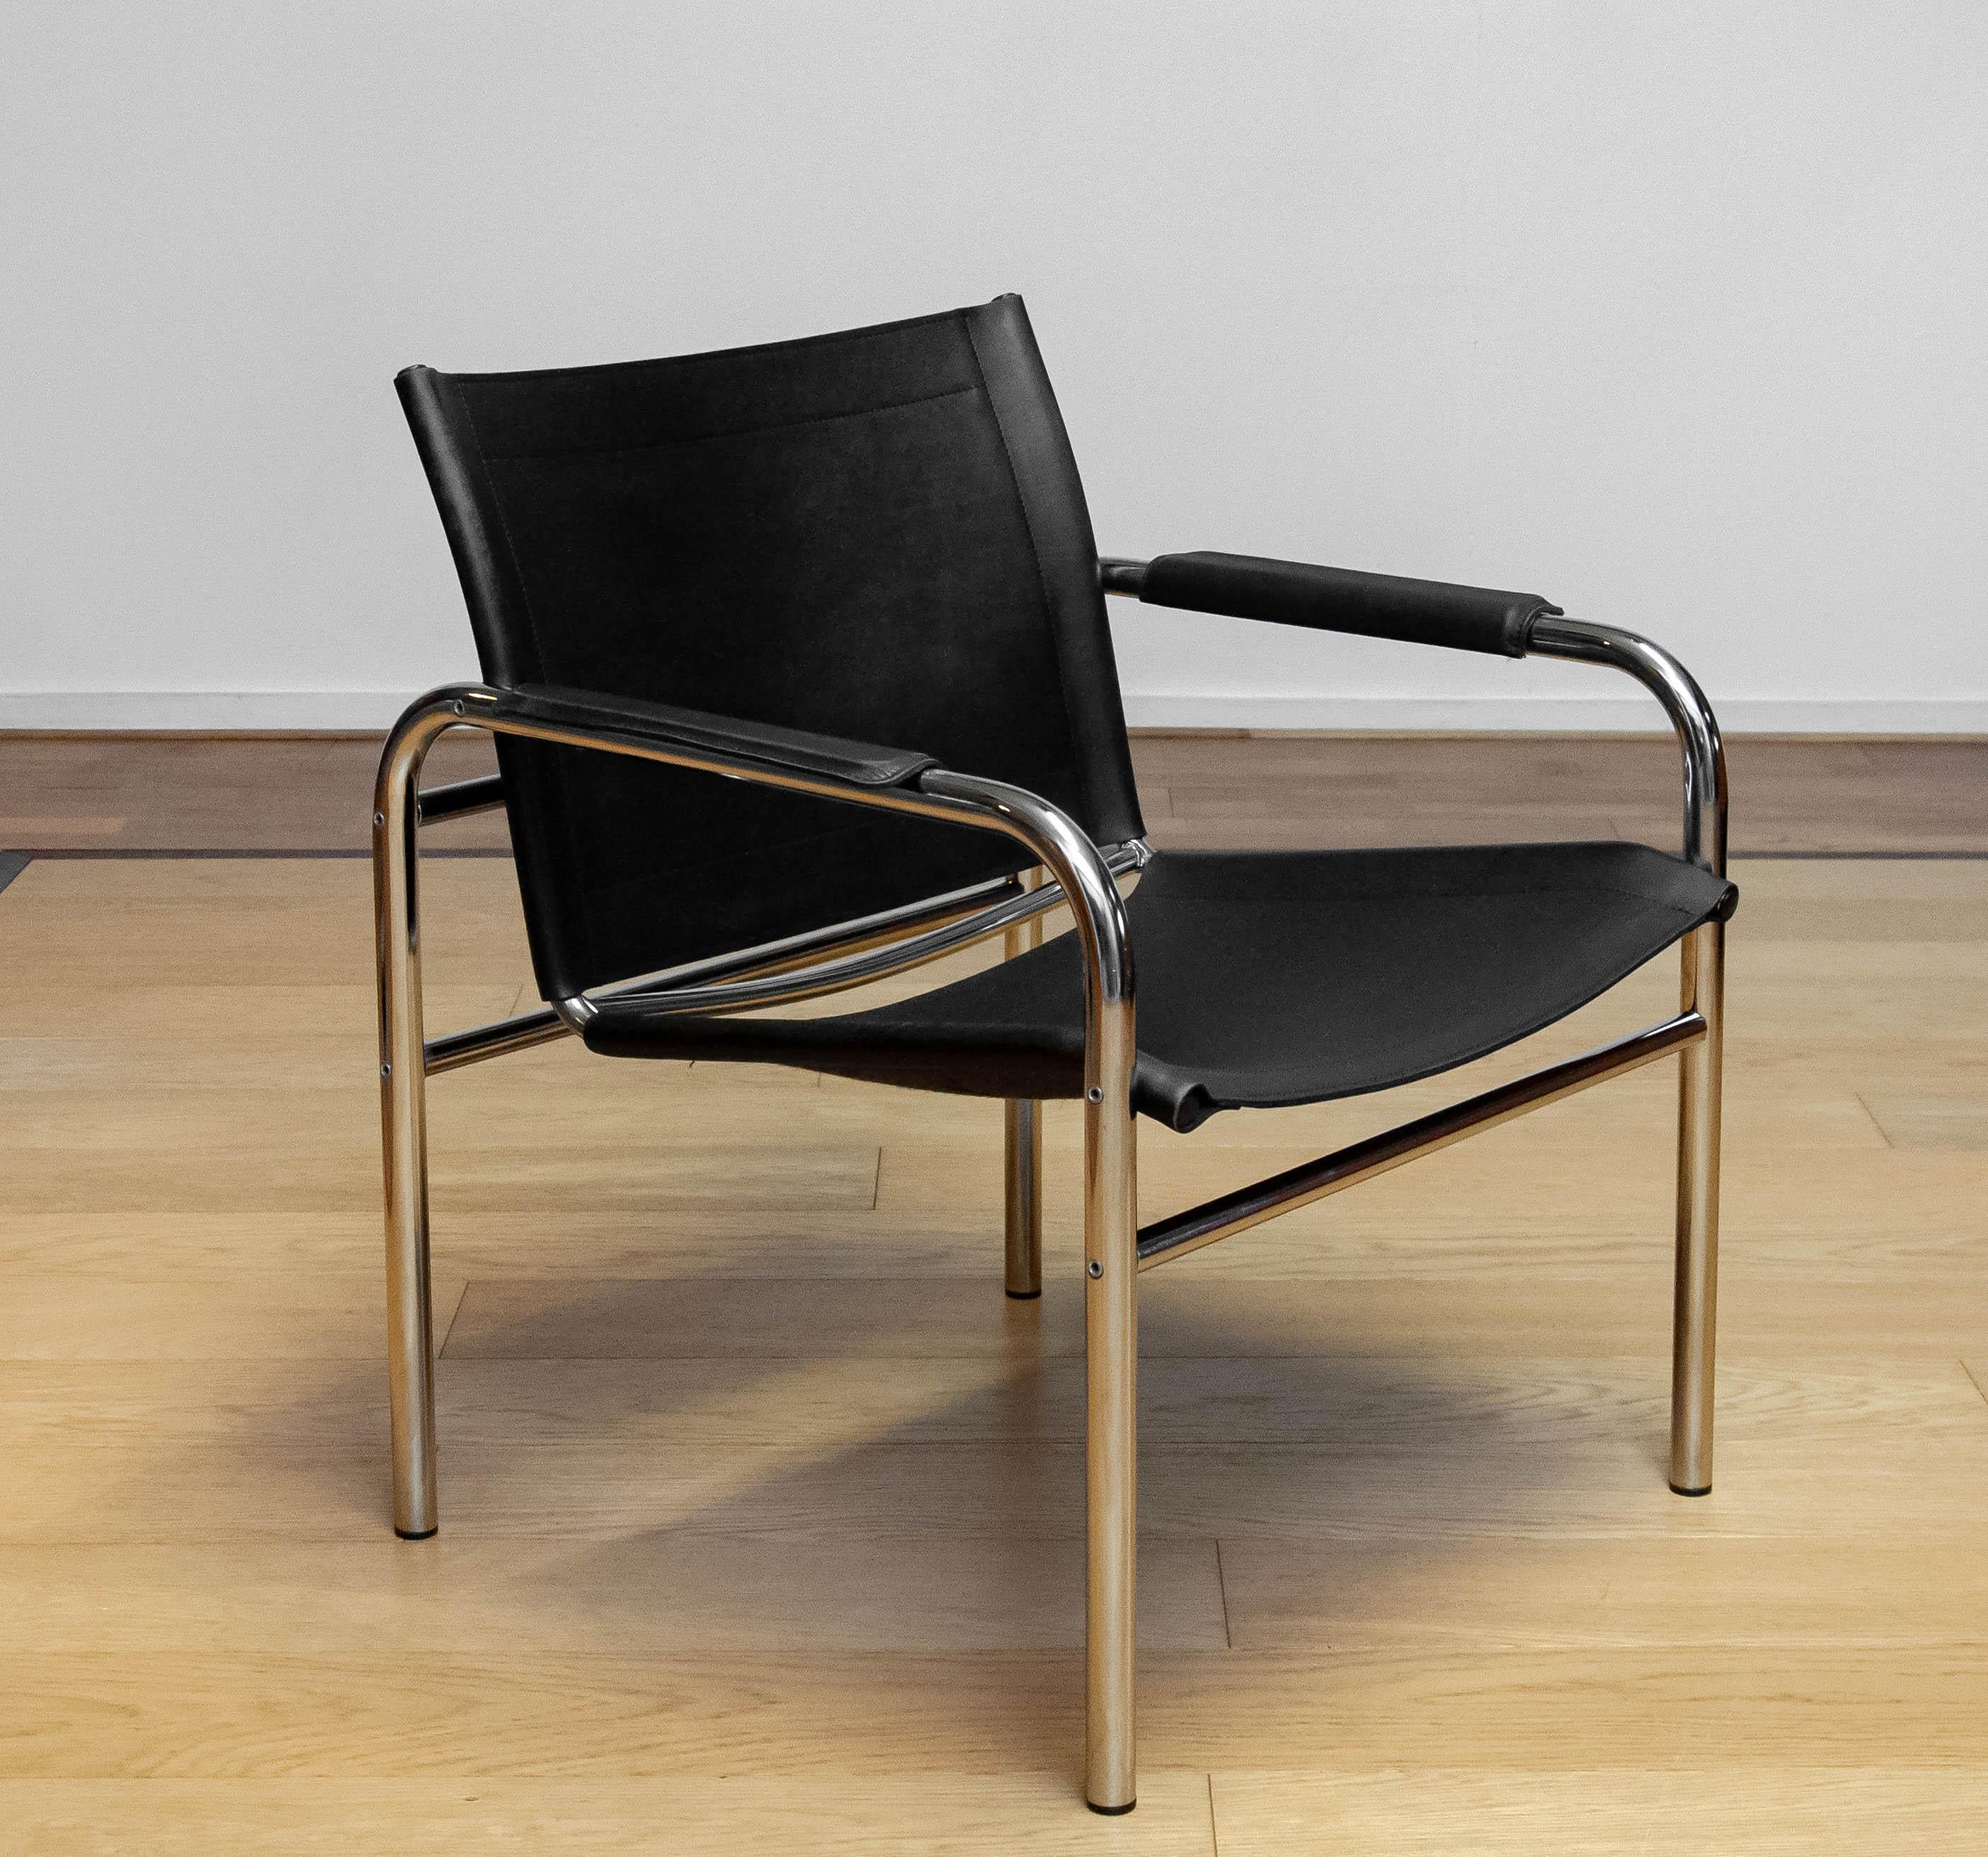 1970s Tubular Armchair Designed By Tord Bjorklund Upholstered With Black Leather For Sale 2